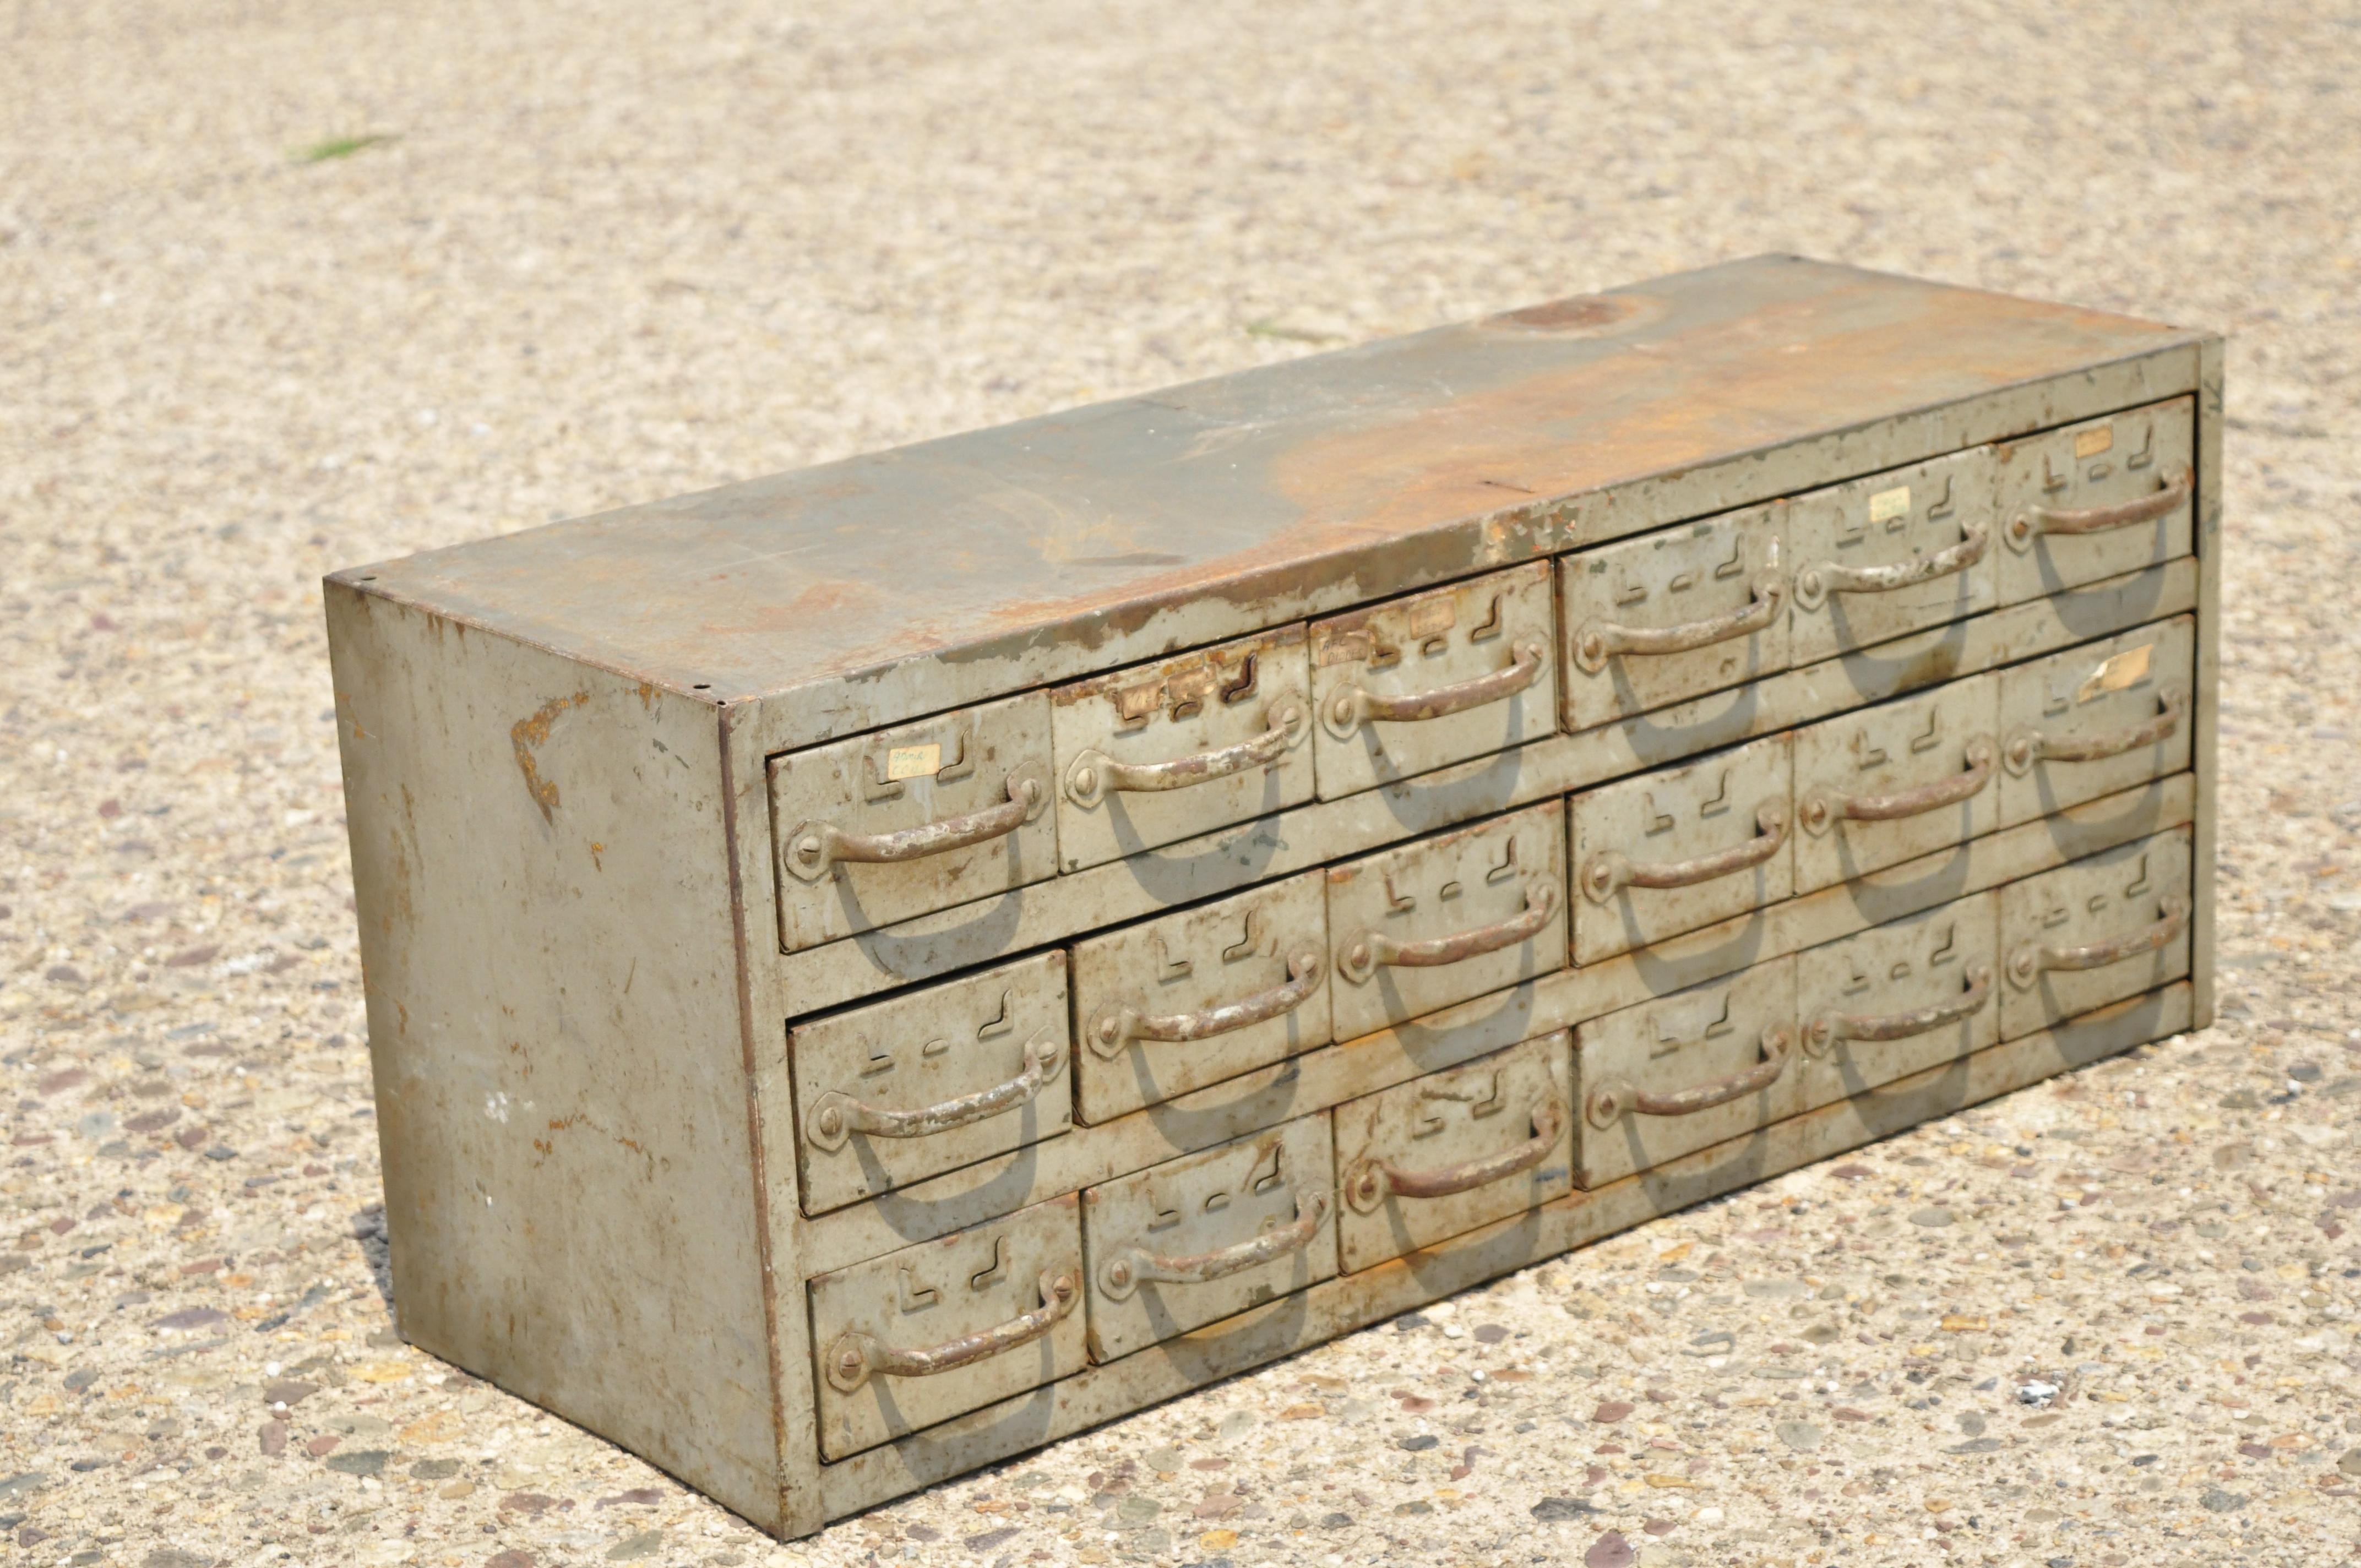 Vintage 18 Drawer steel metal industrial green machinist tool chest cabinet. Item features (18) drawers, steel construction, distressed finish, quality American craftsmanship. Circa mid 20th century. Measurements: 14